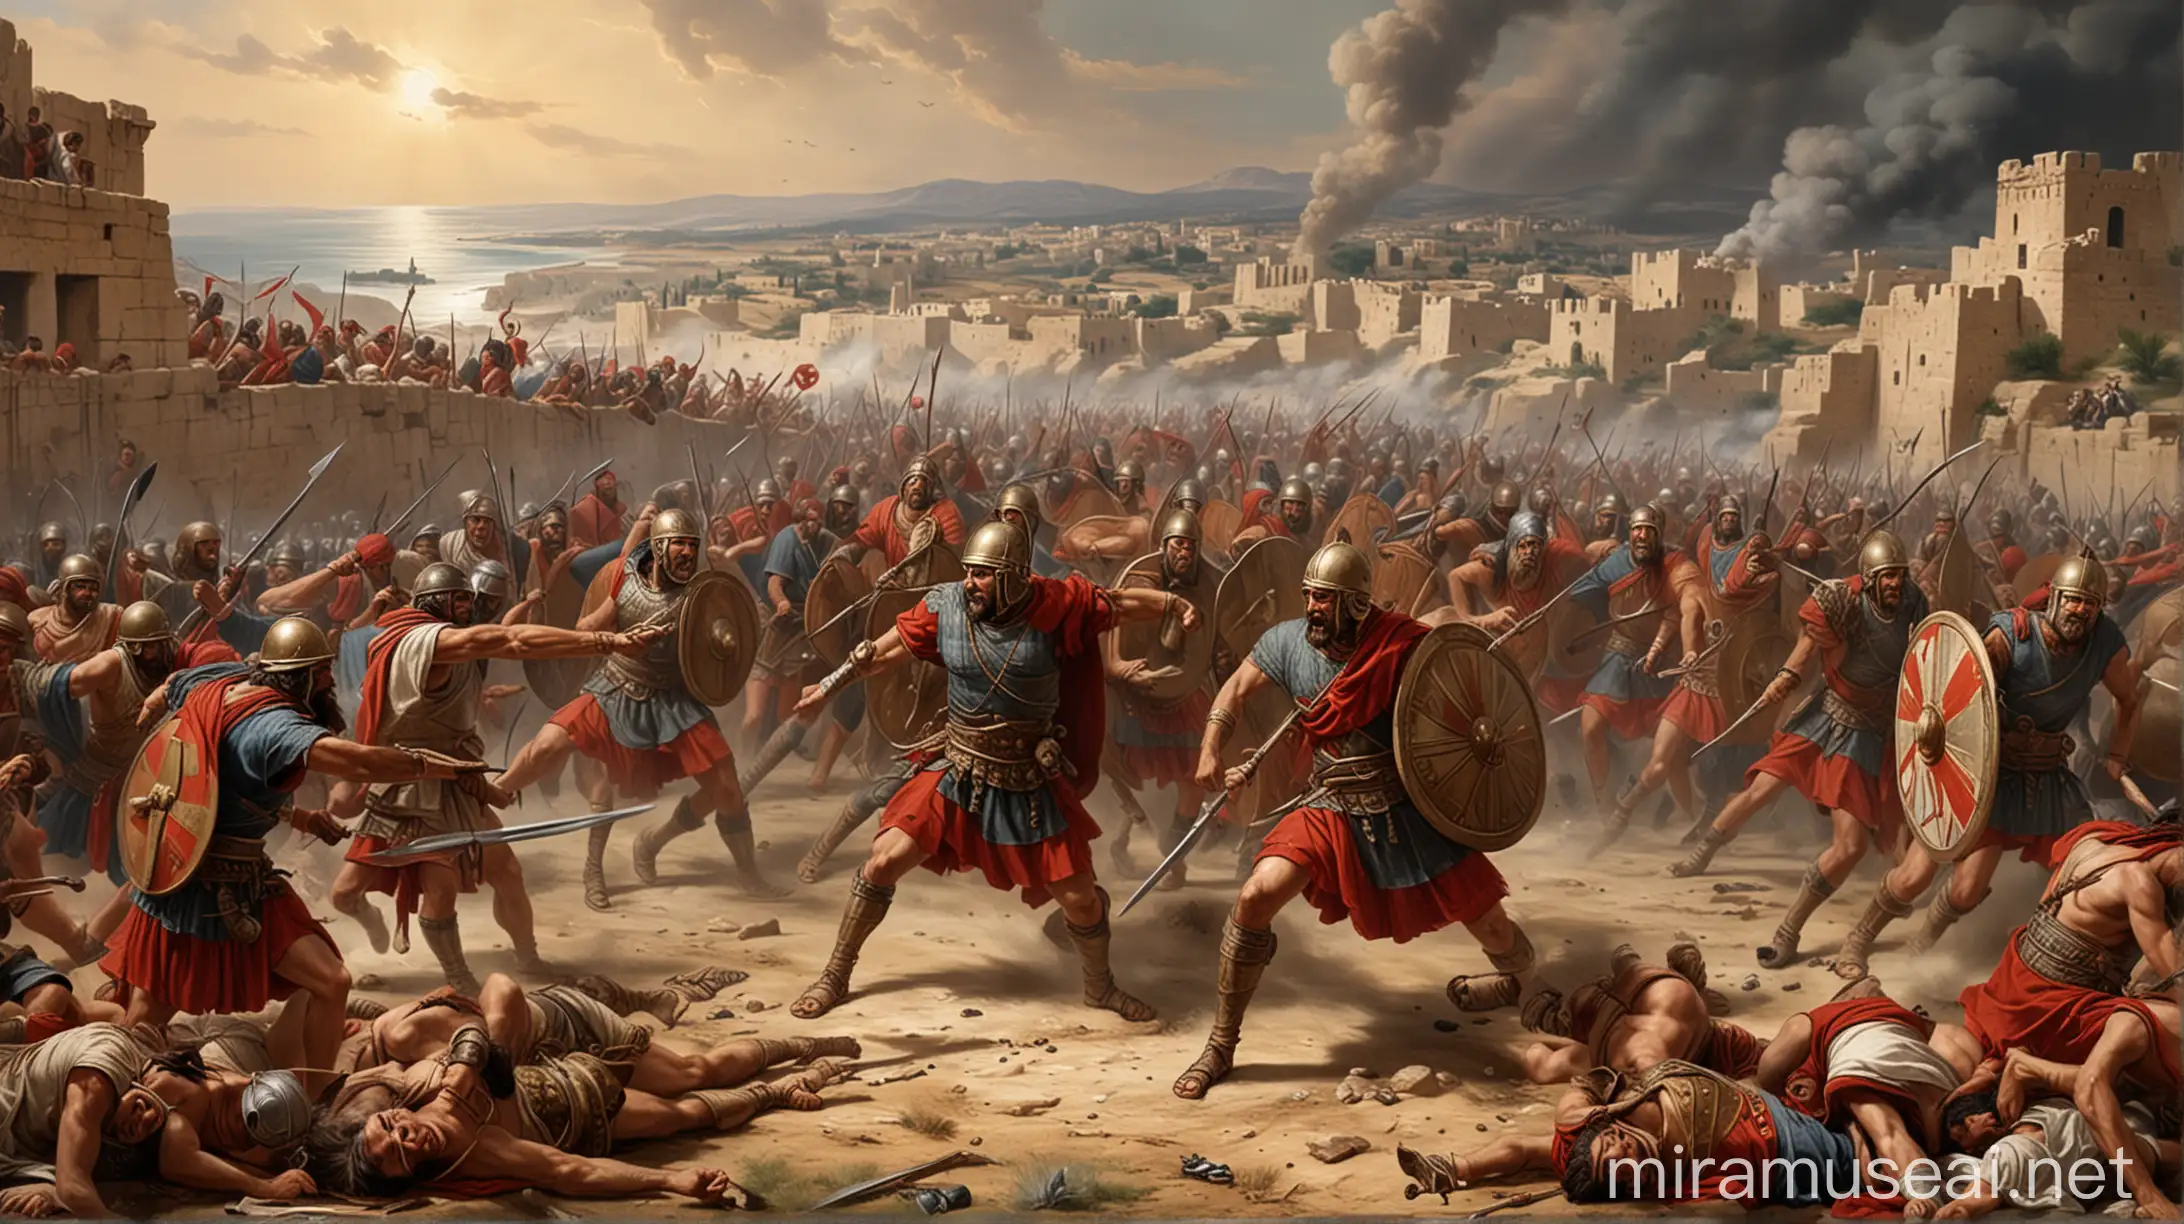 The aramean defeat the Israelite in battle in ancient world 